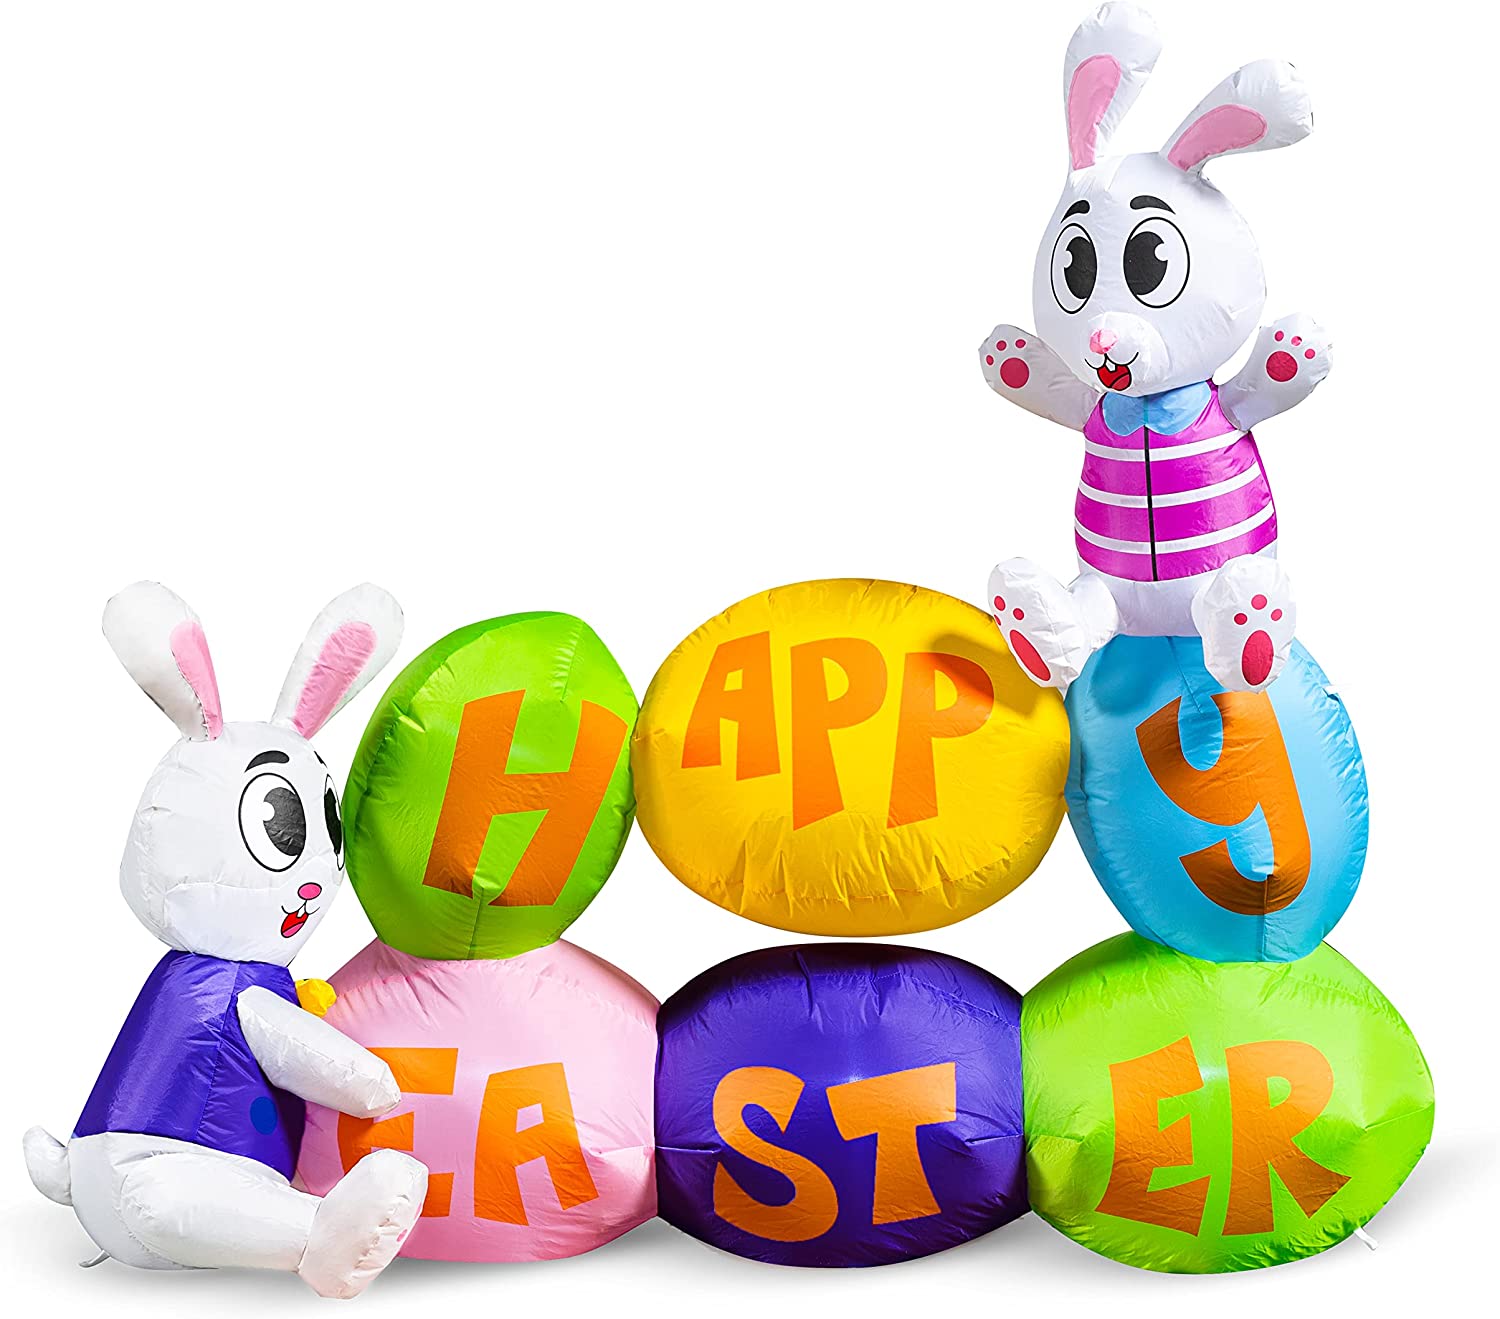 You are currently viewing Can you provide guidance on mixing different textures in Easter decorations?